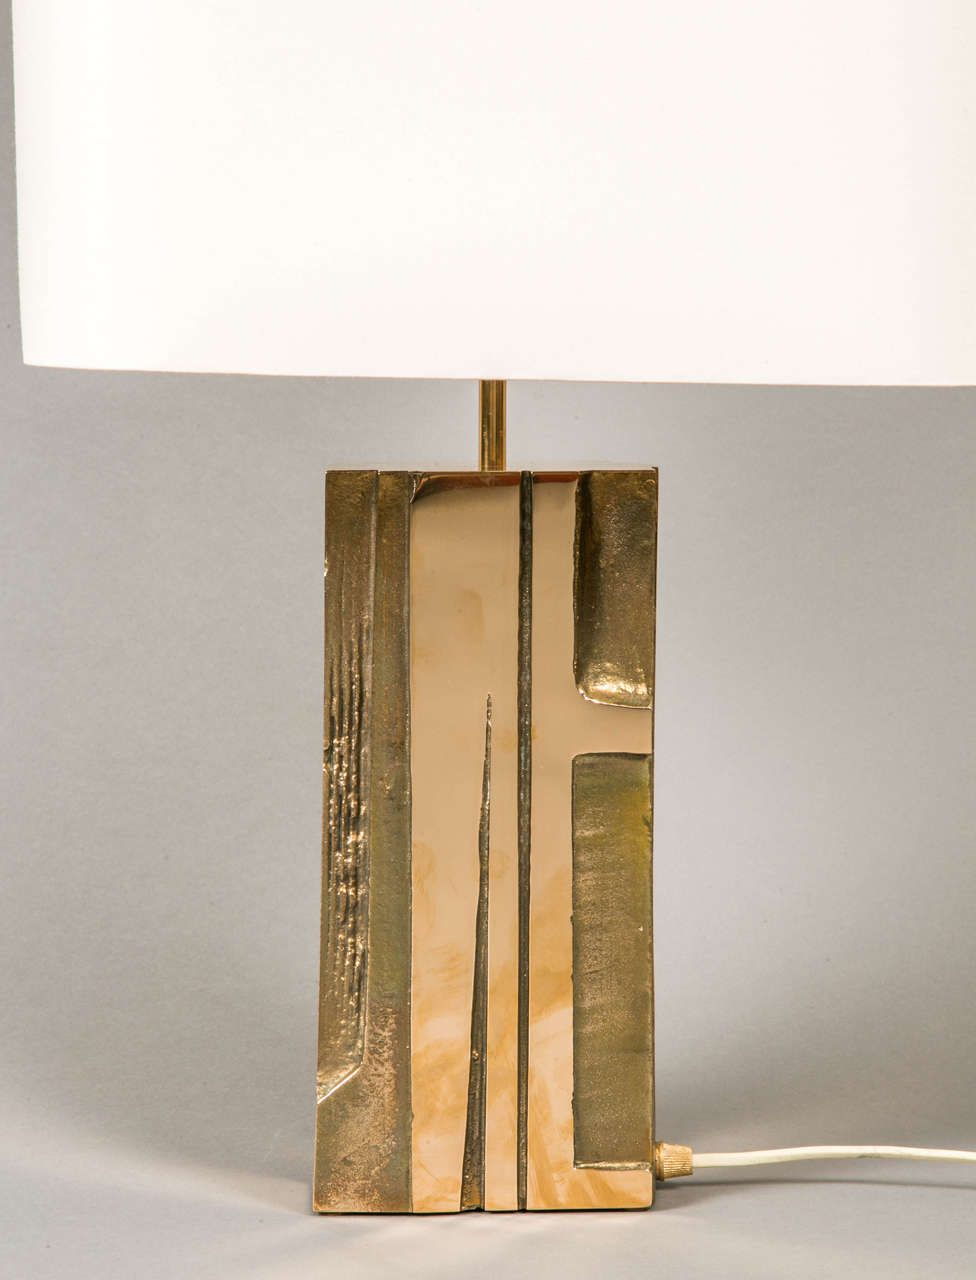 French Bronze Table Lamp, circa 1965-1970, by M. Mangematin